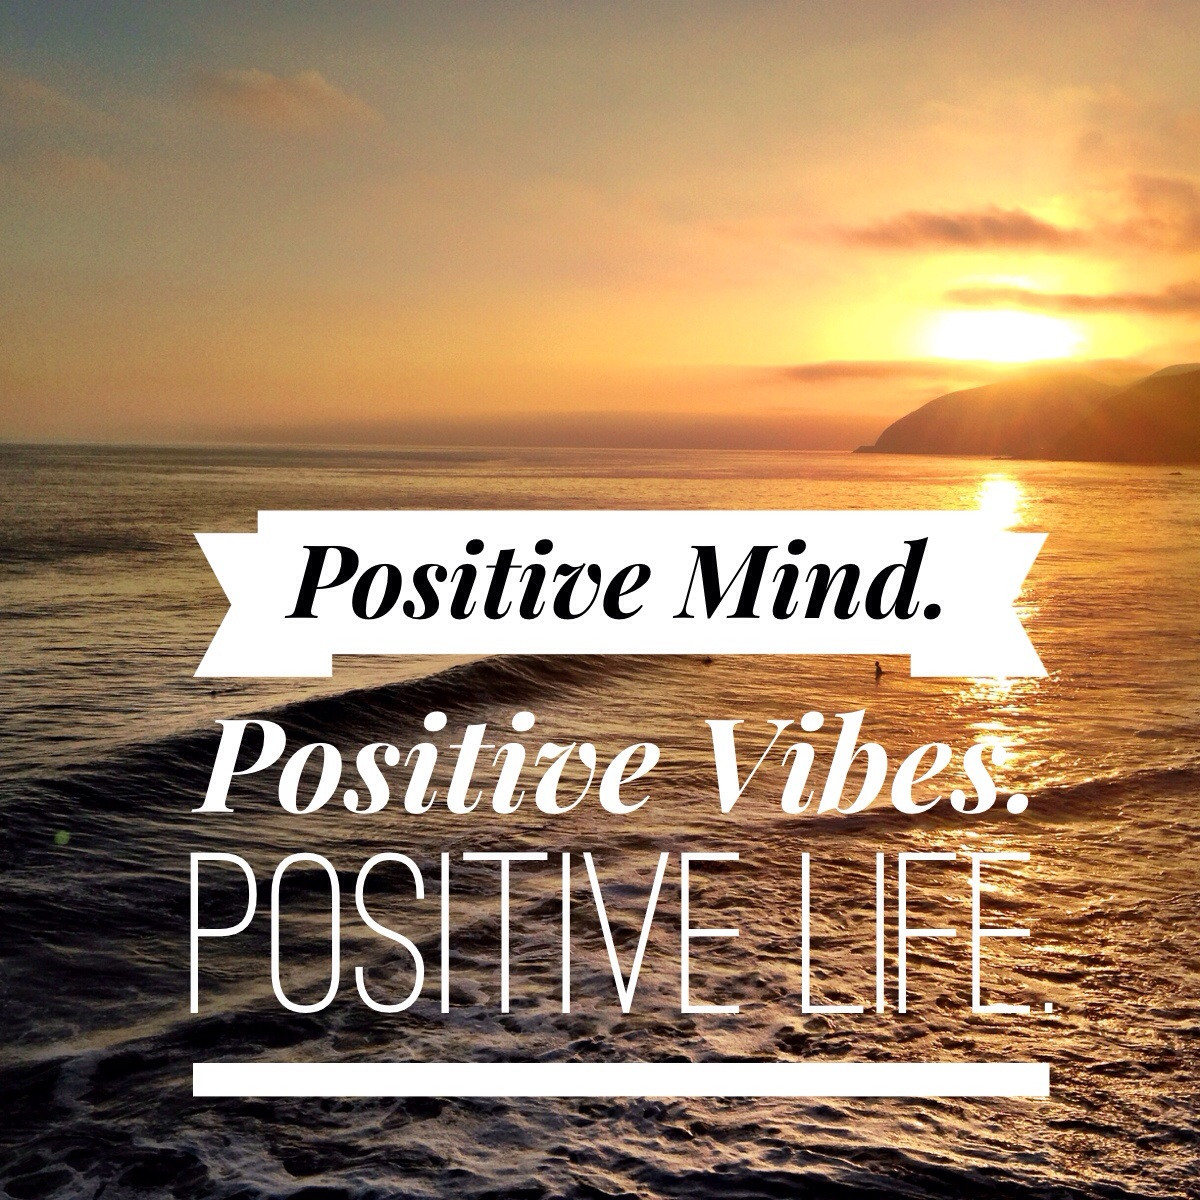 Life Positiveness Quotes
 Positive Mind Positive Life Quotes QuotesGram